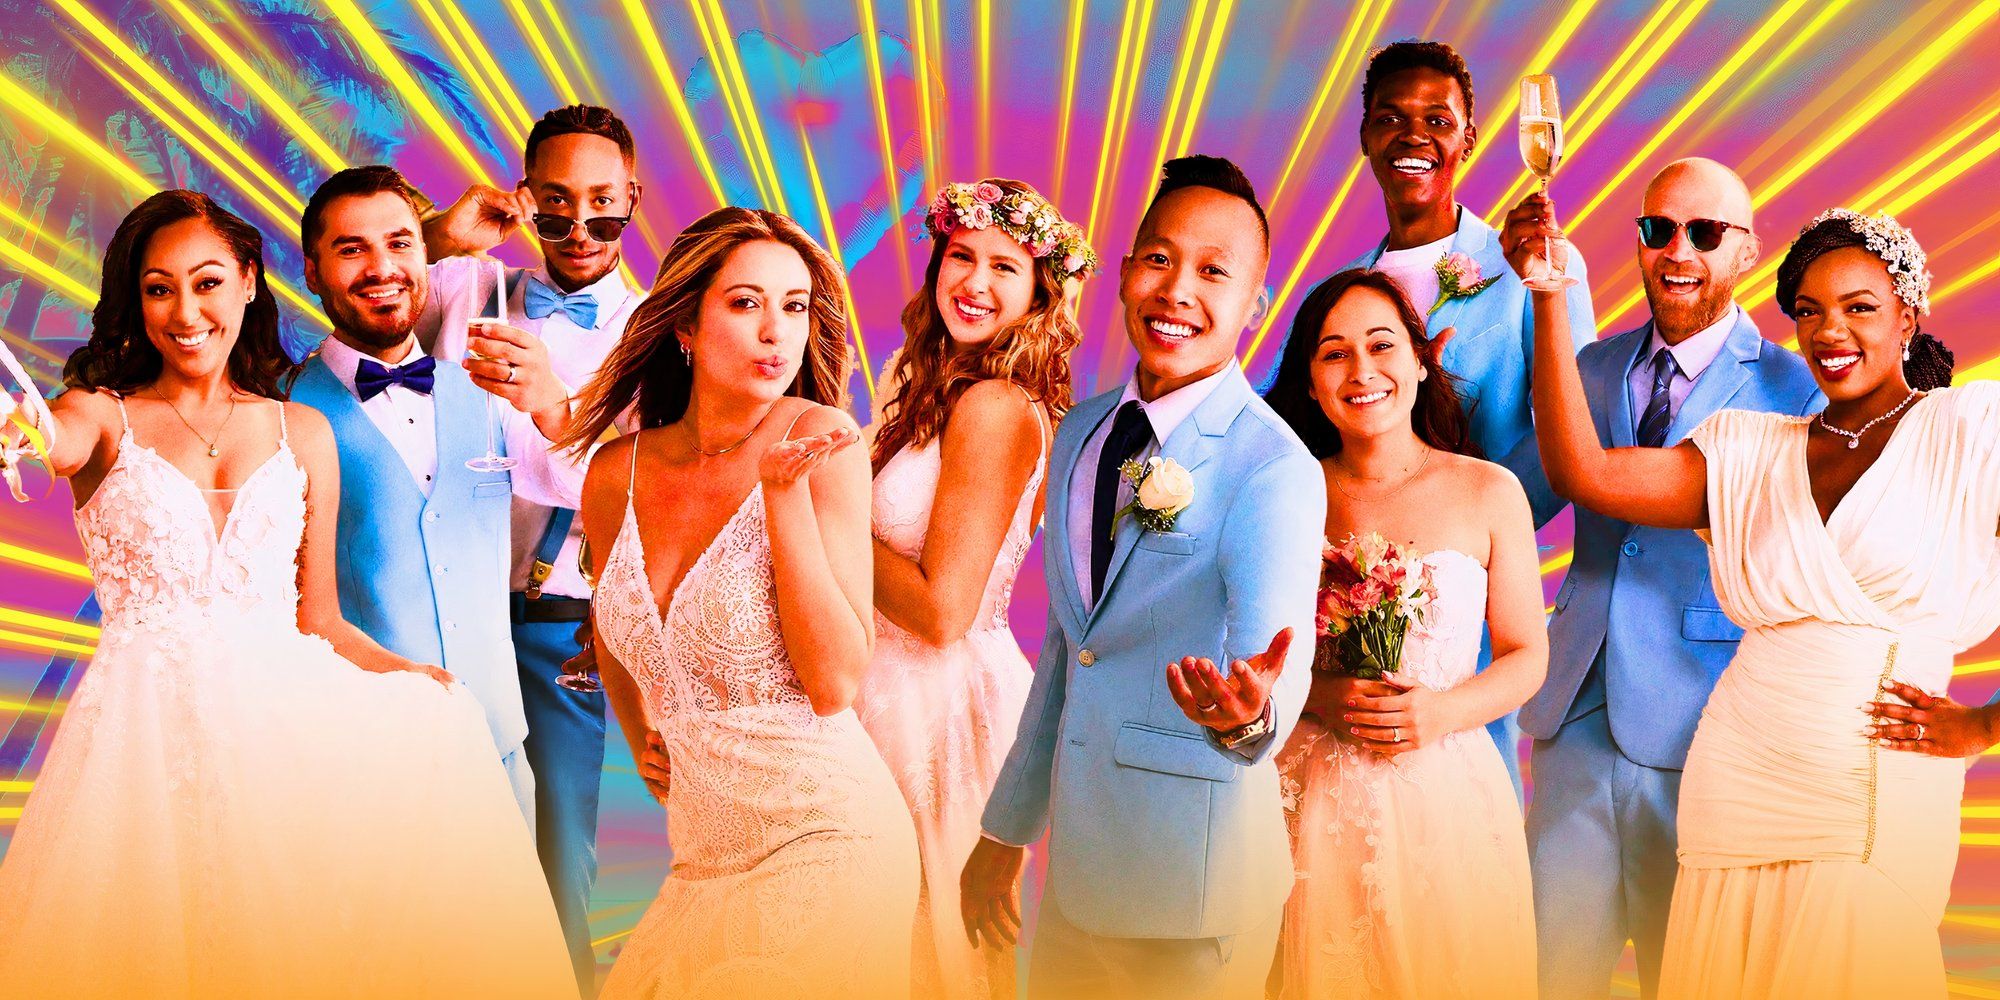 married at first sight season 15 cast wearing formalwear and smiling with colorful yellow pink and blue background